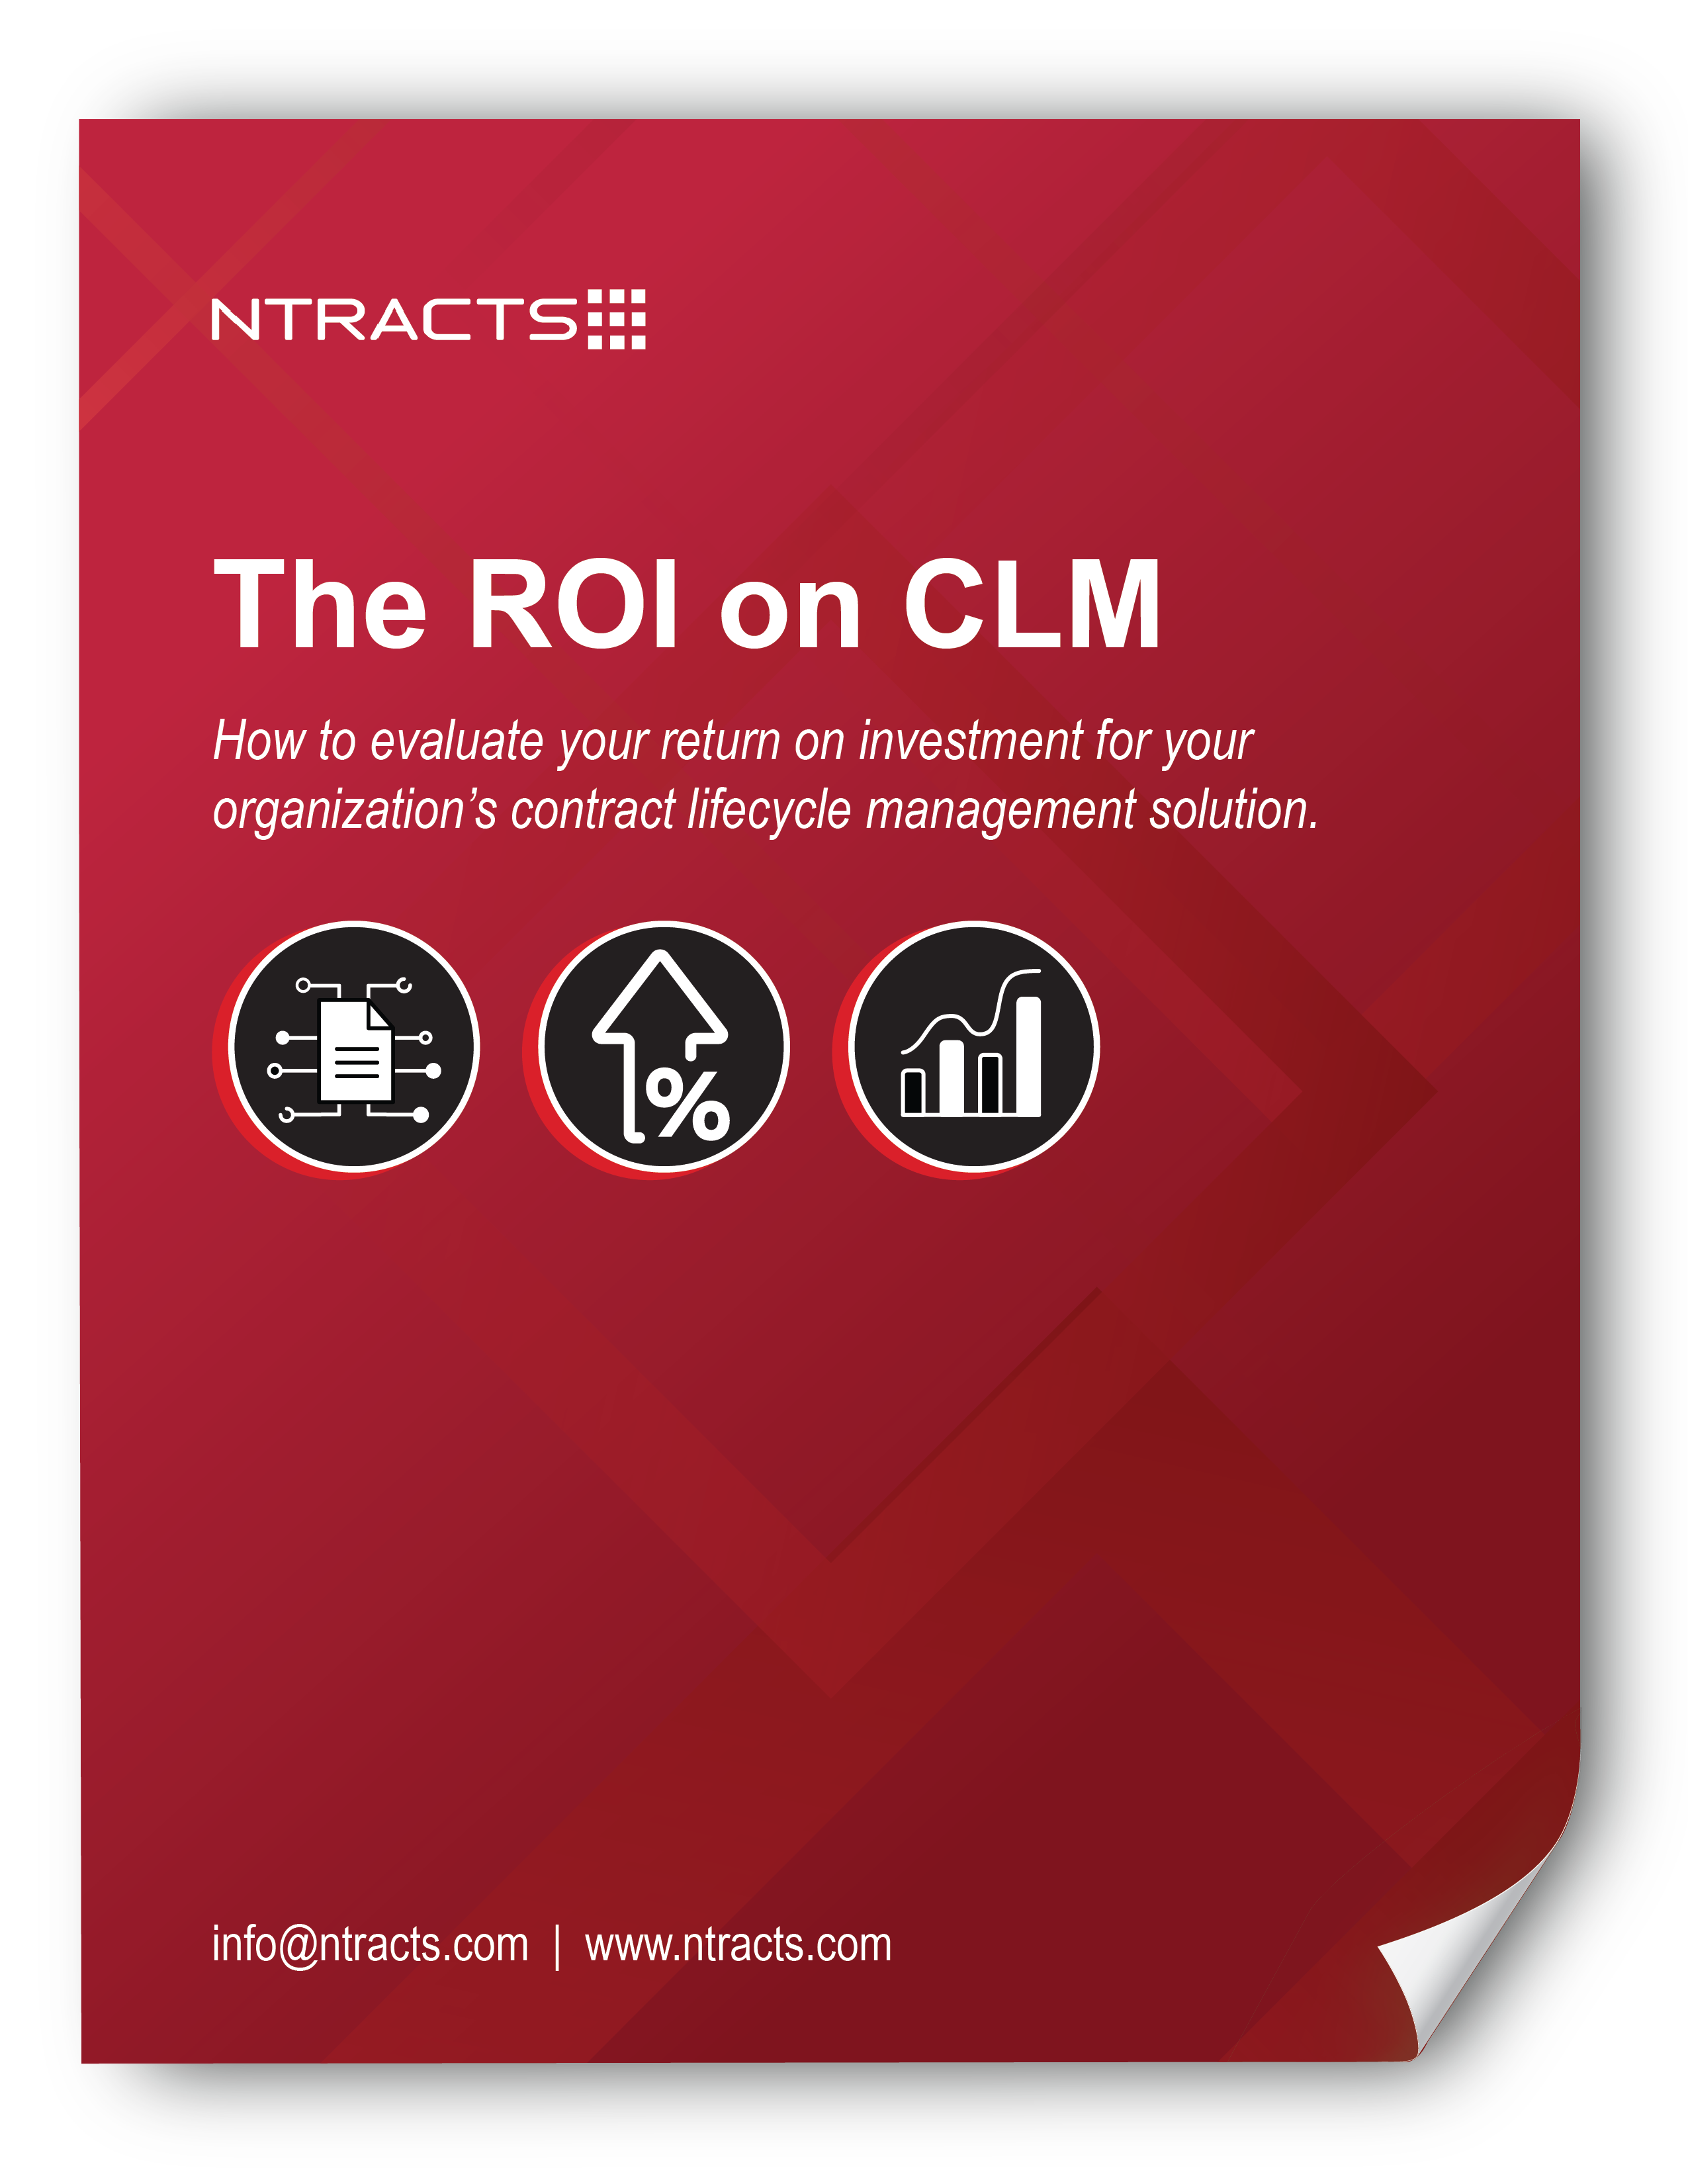 The ROI on CLM infographic